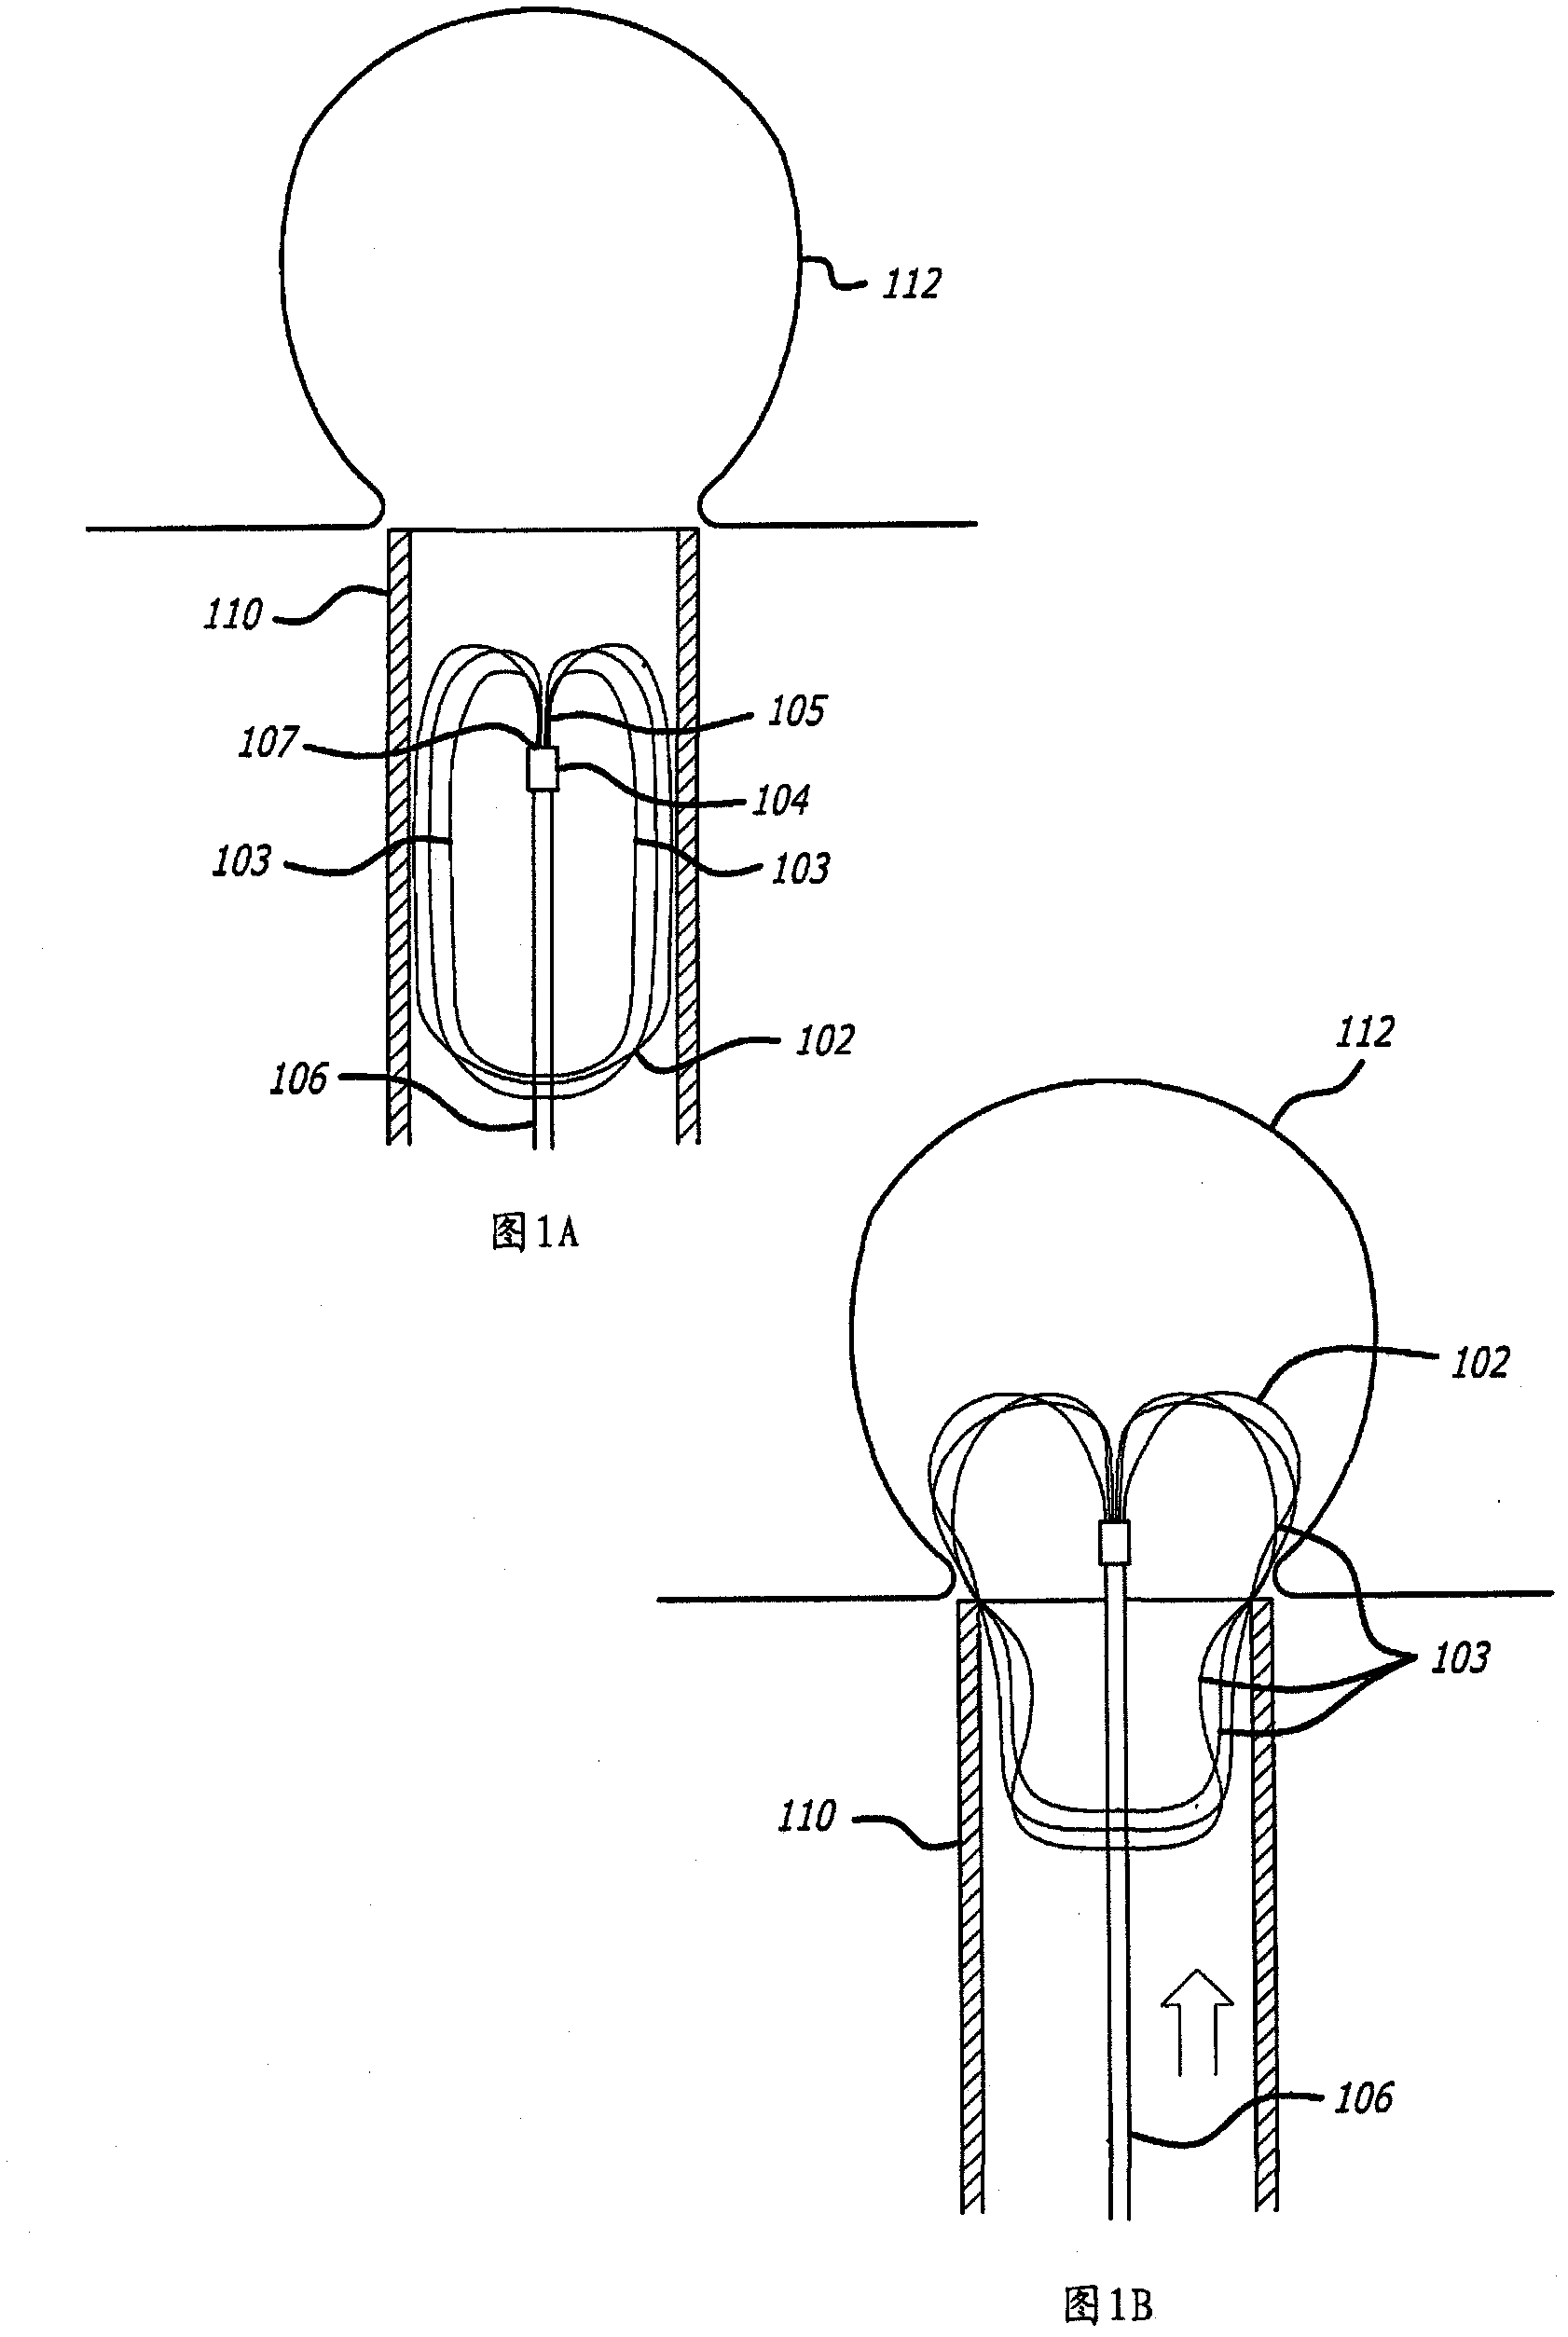 Self-expandable aneurysm filling device and system